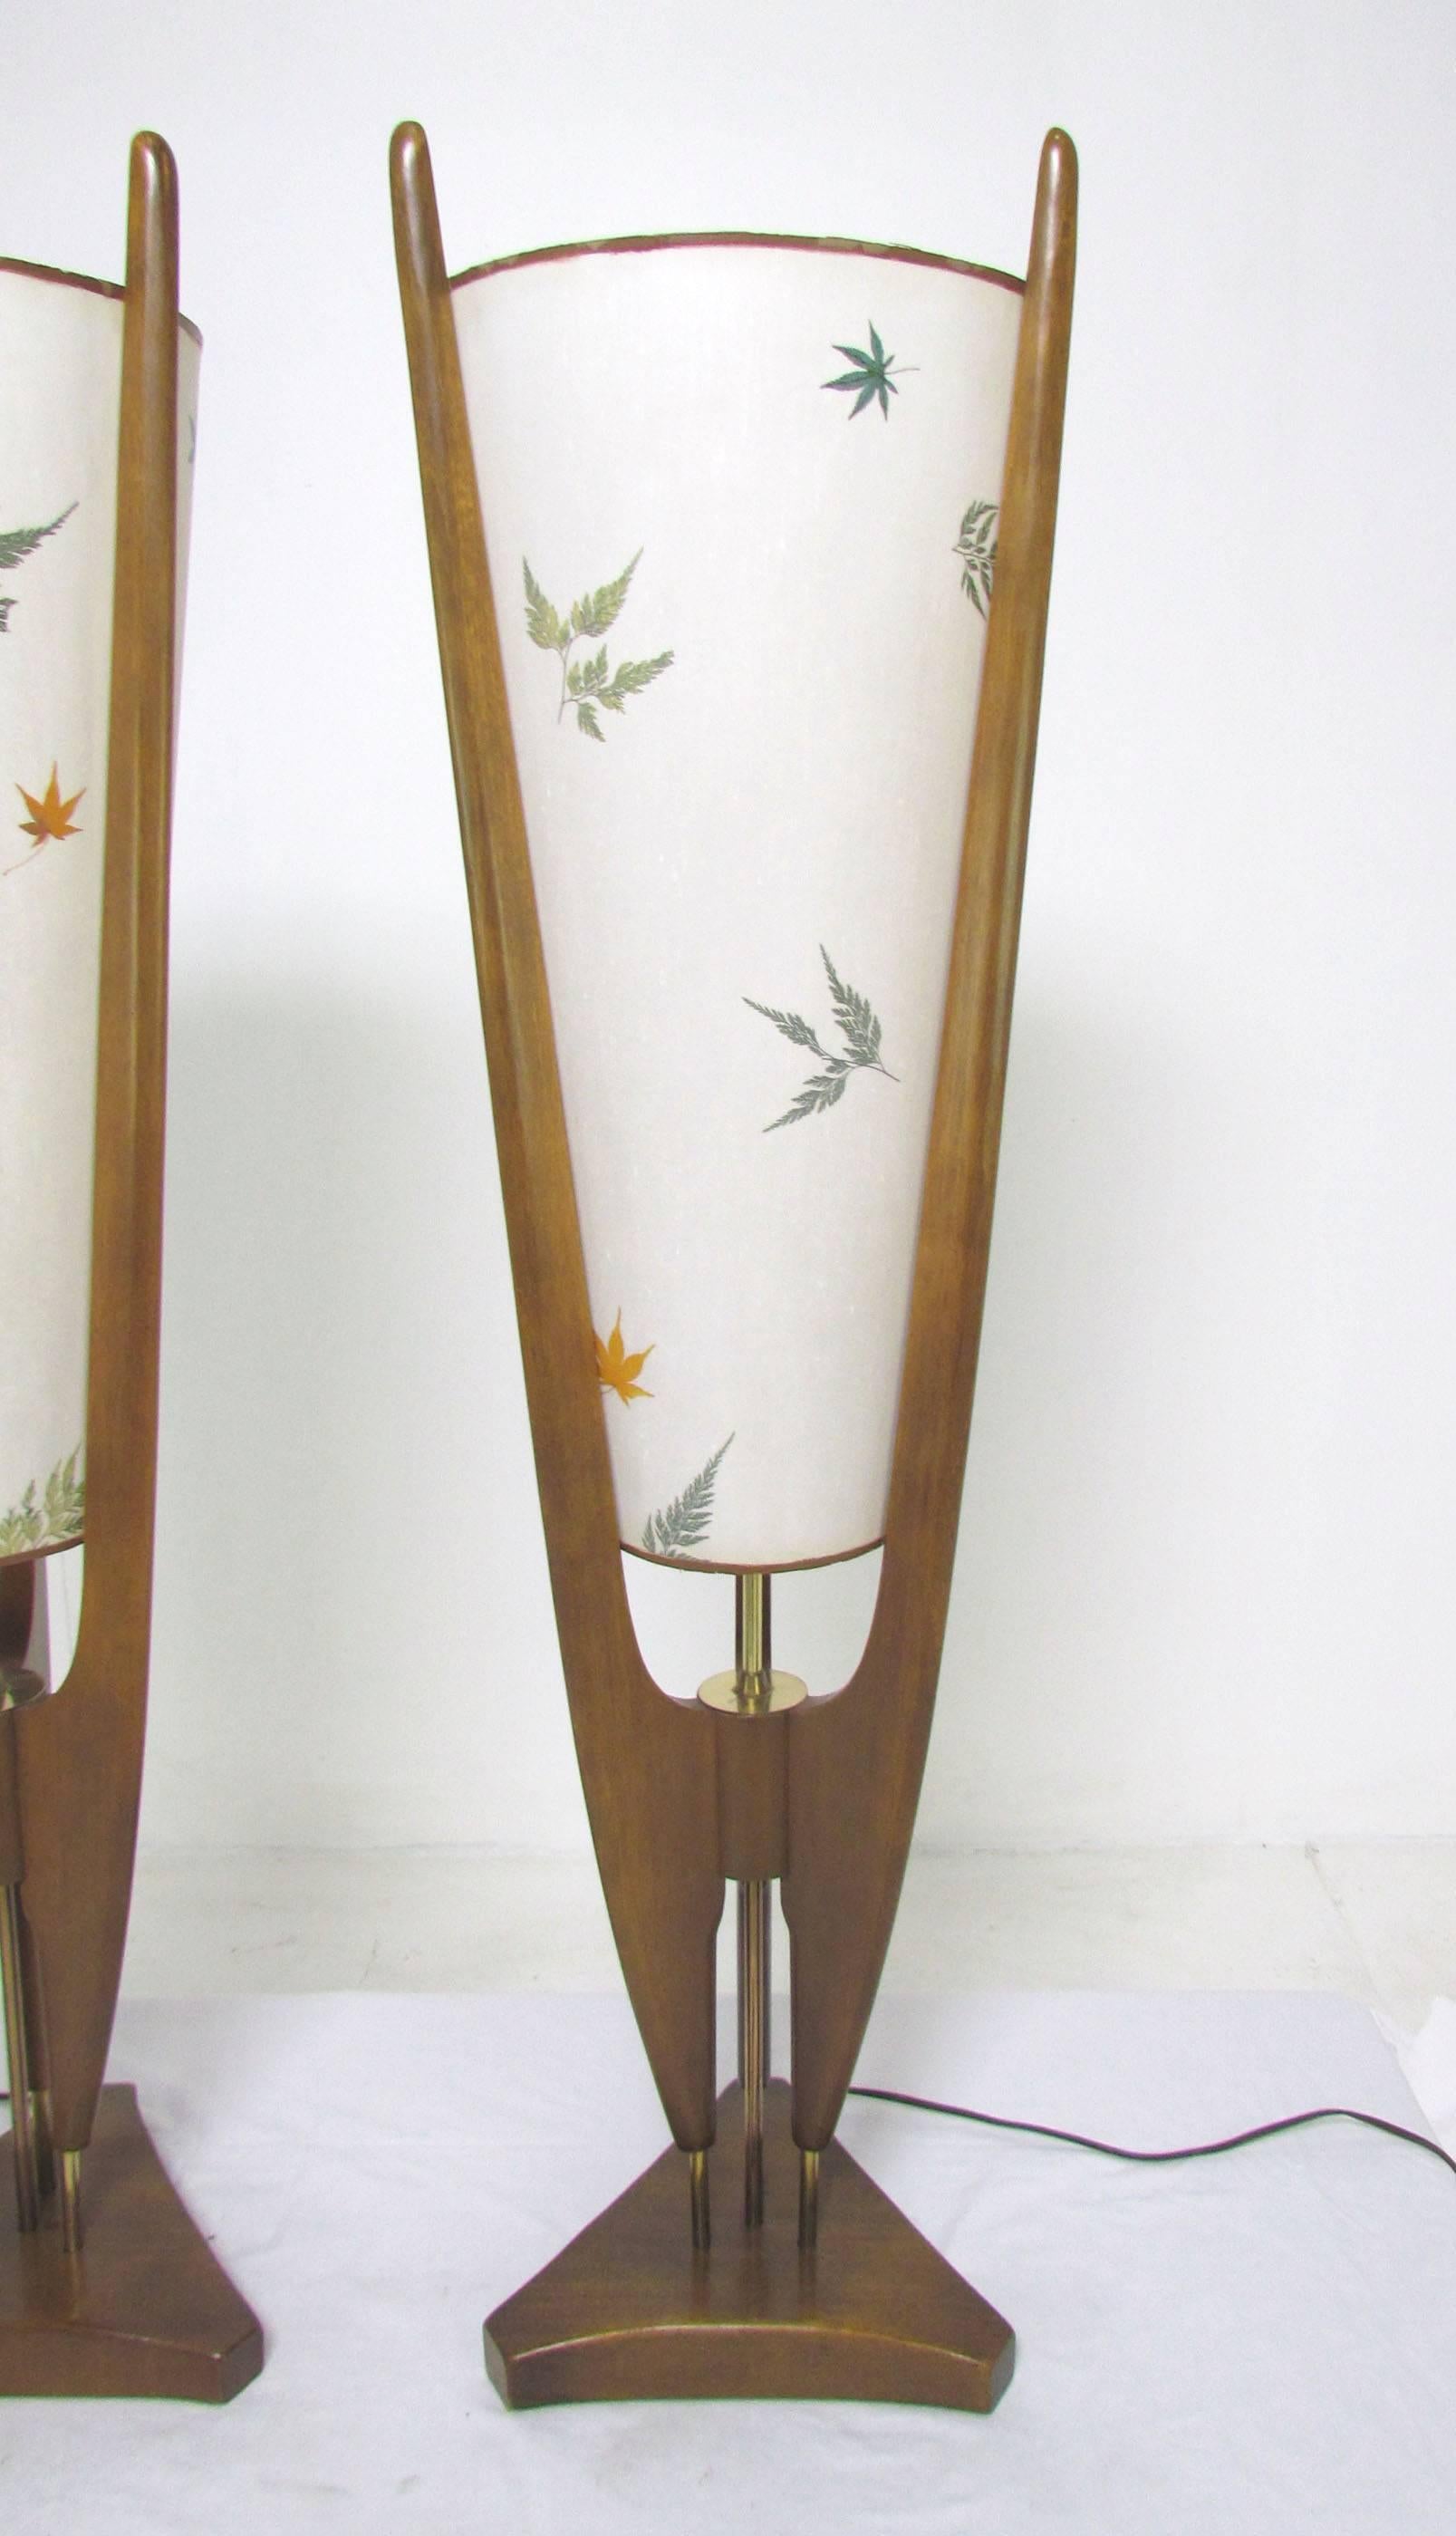 Pair of Mid-Century table lamps with printed parchment shades by Modeline, walnut tri-arm frame with brass accents.